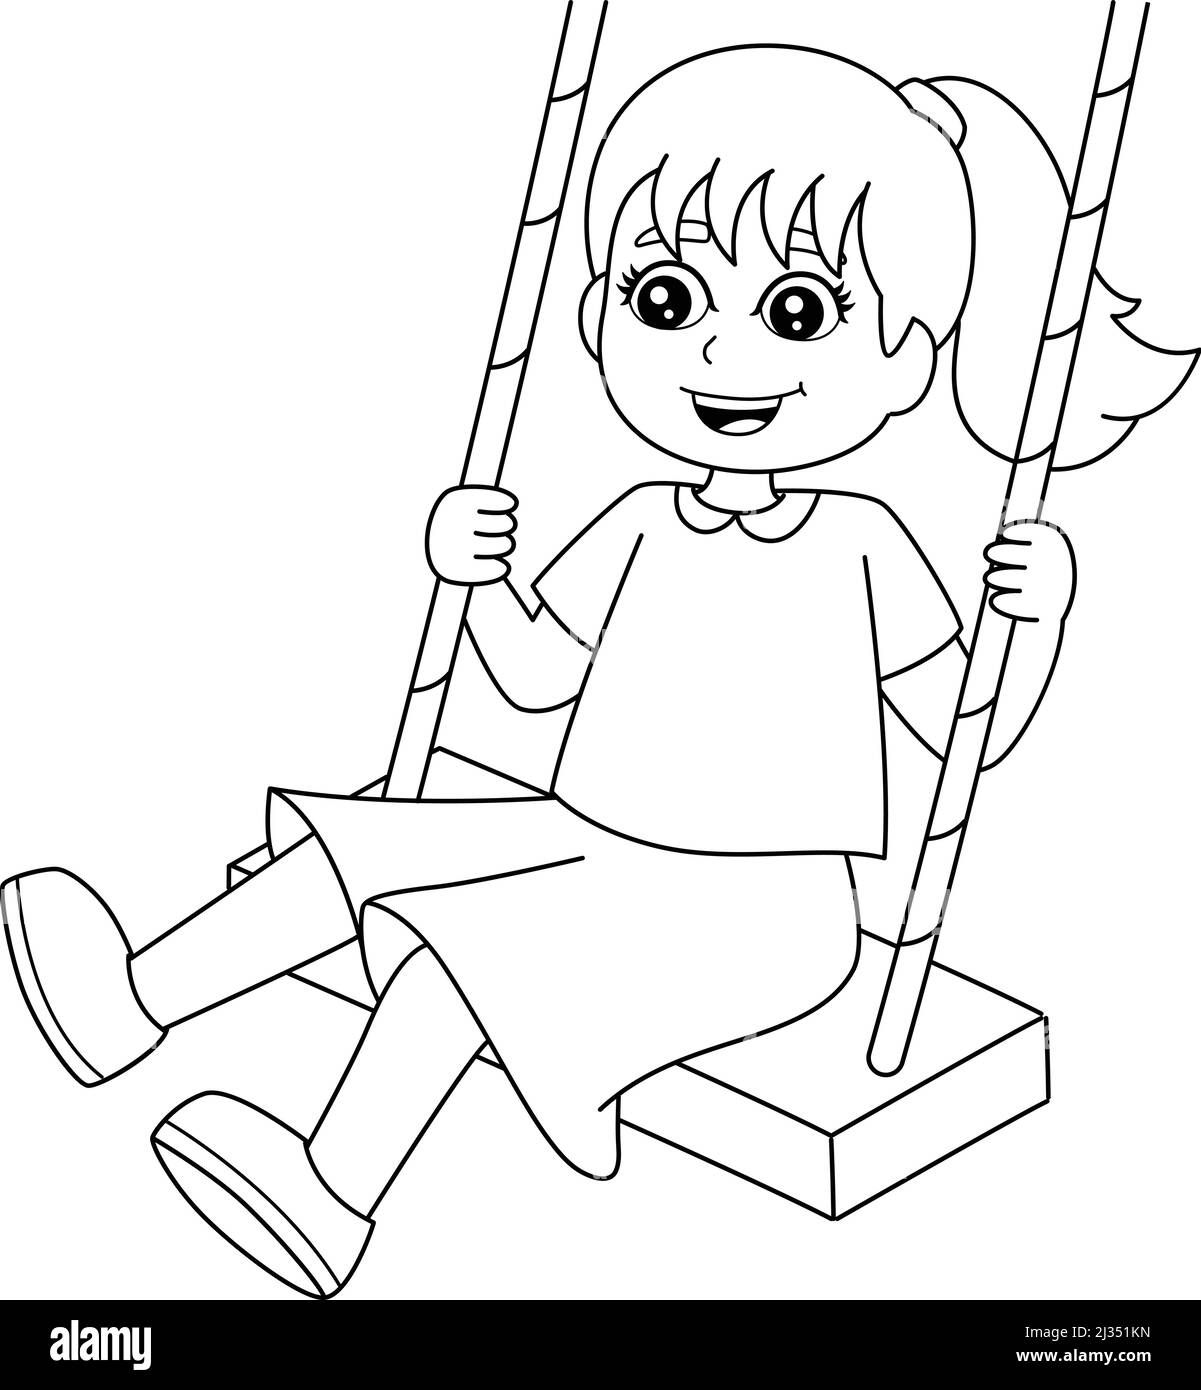 Girl on a swing coloring page isolated for kids stock vector image art